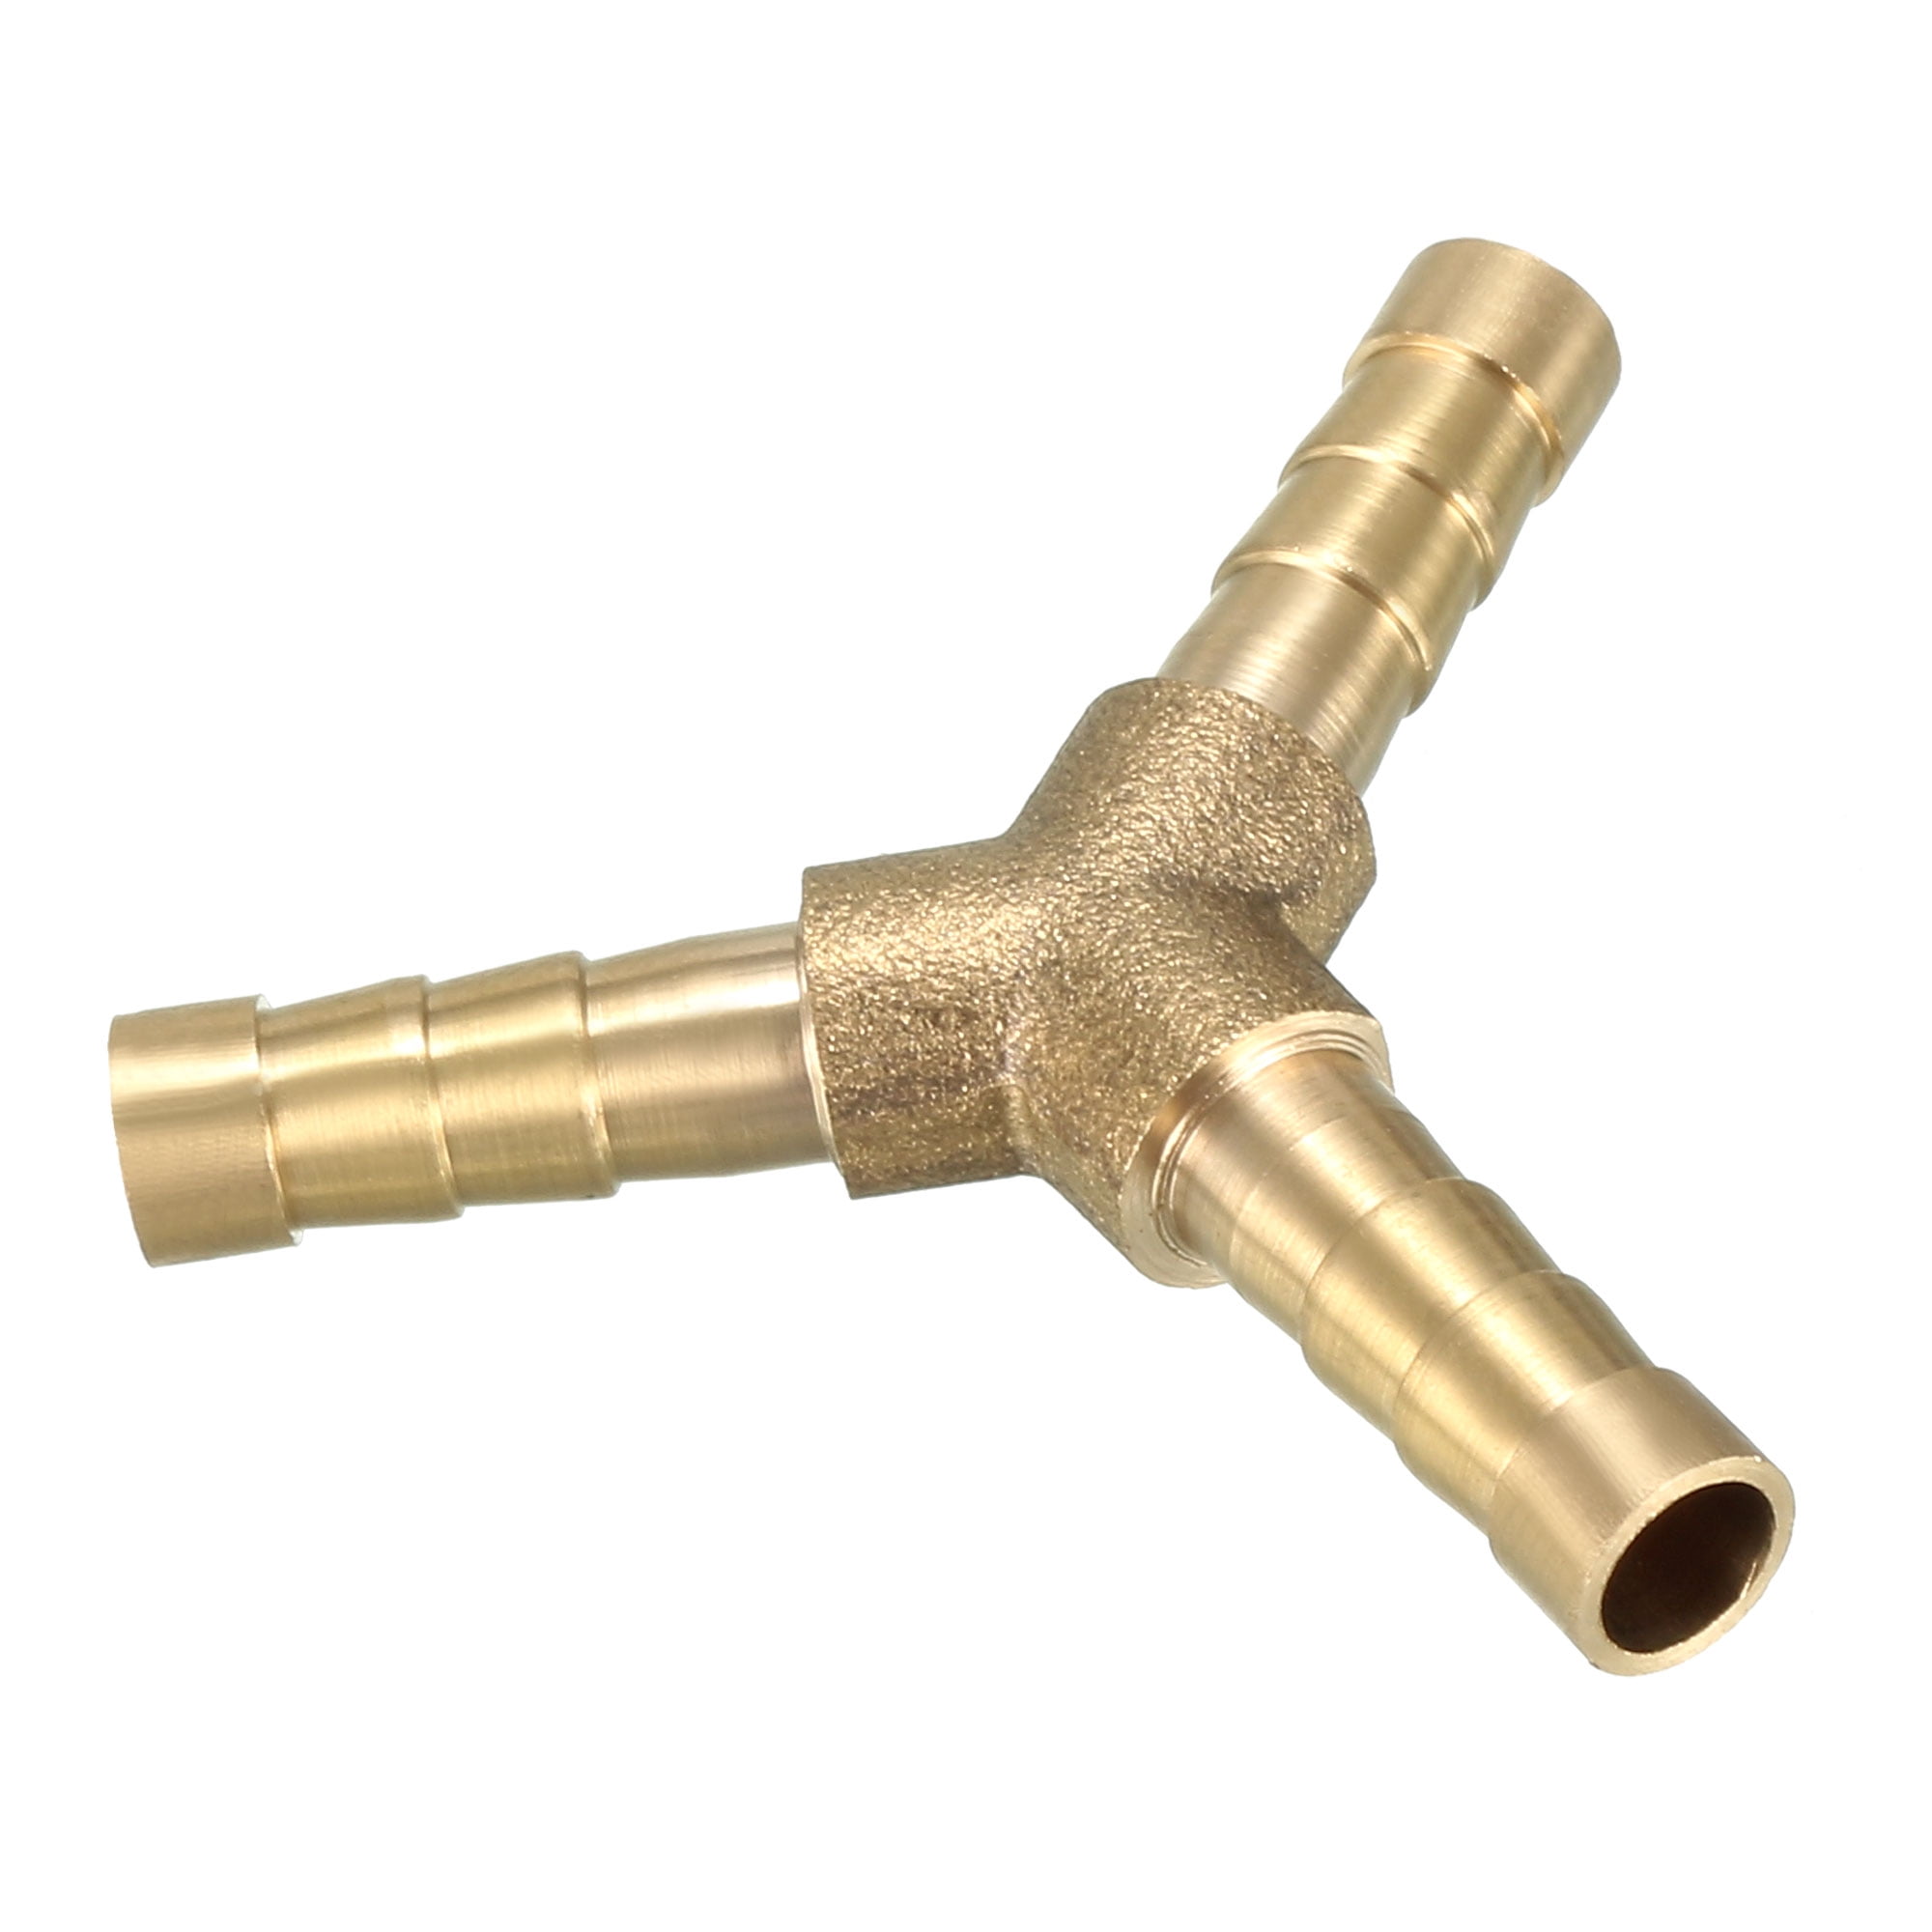 Details about  / Brass Barb Hose Joiner Tee 3-way 4-way Barbed Coupler Connector Pipe Fitting New